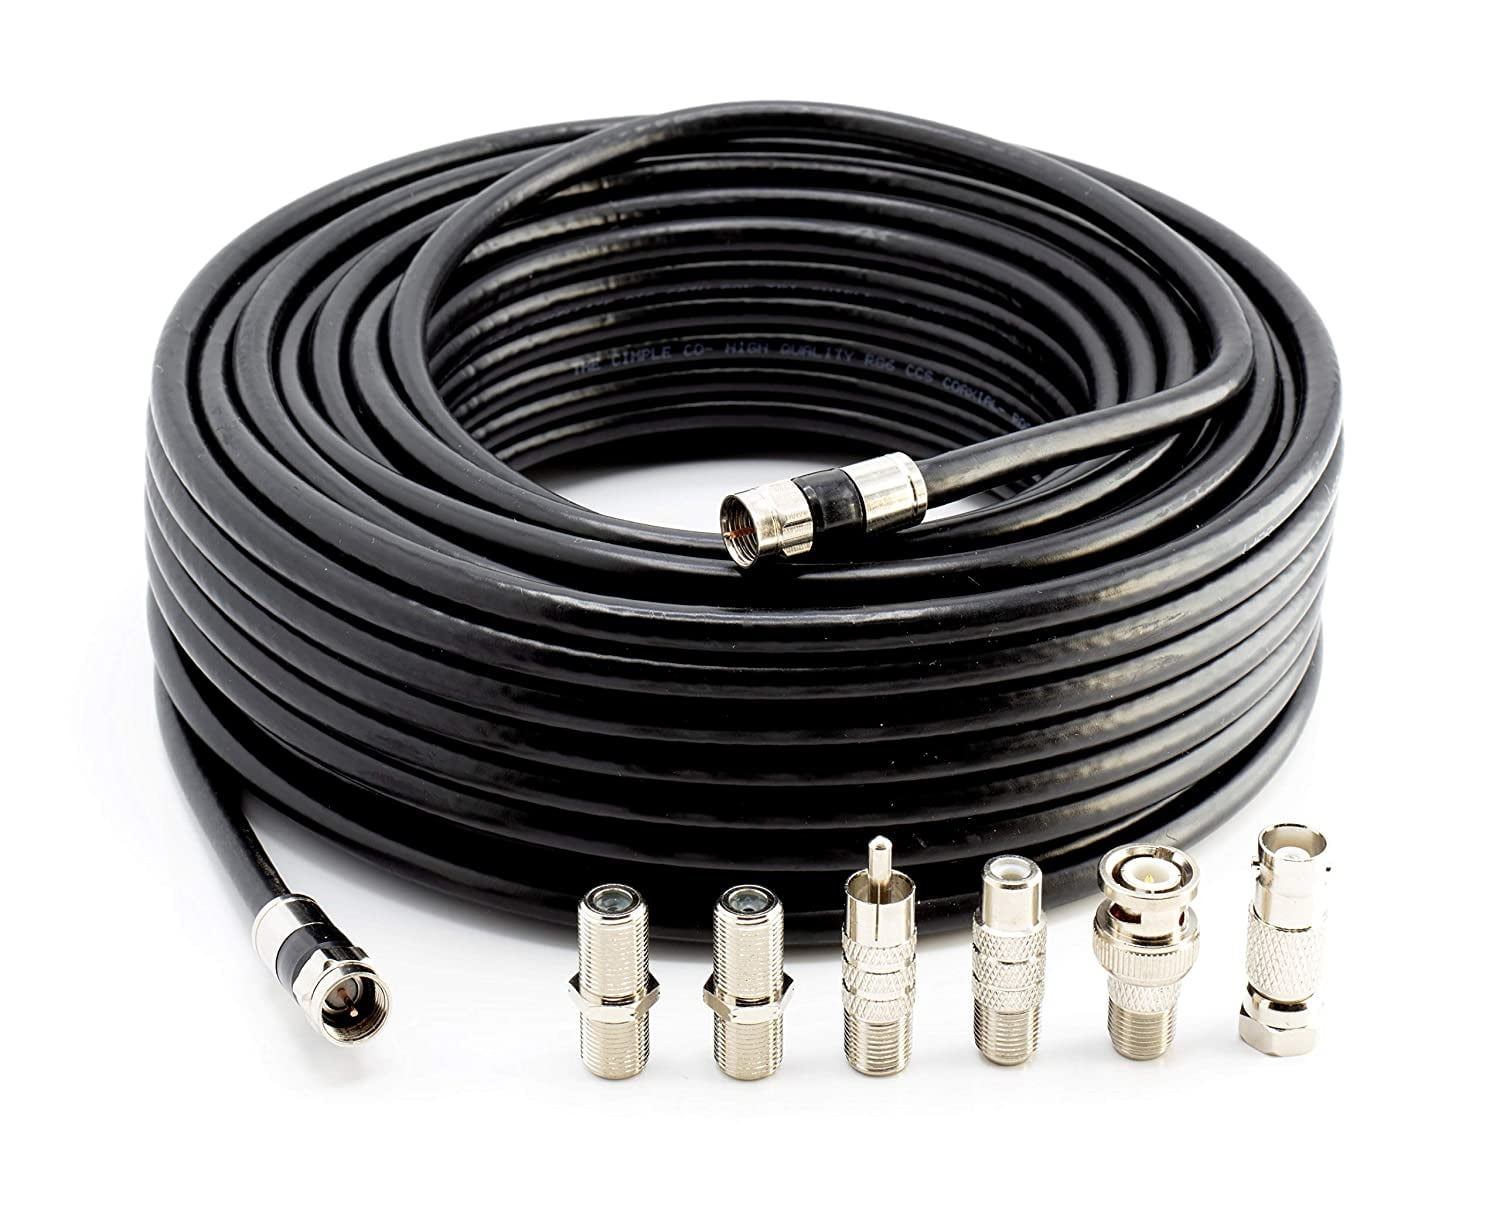 THE CIMPLE CO - 100' RG6 Black & 6 Universal Coaxial Cable Connector Ends - F81 RCA BNC Adapters